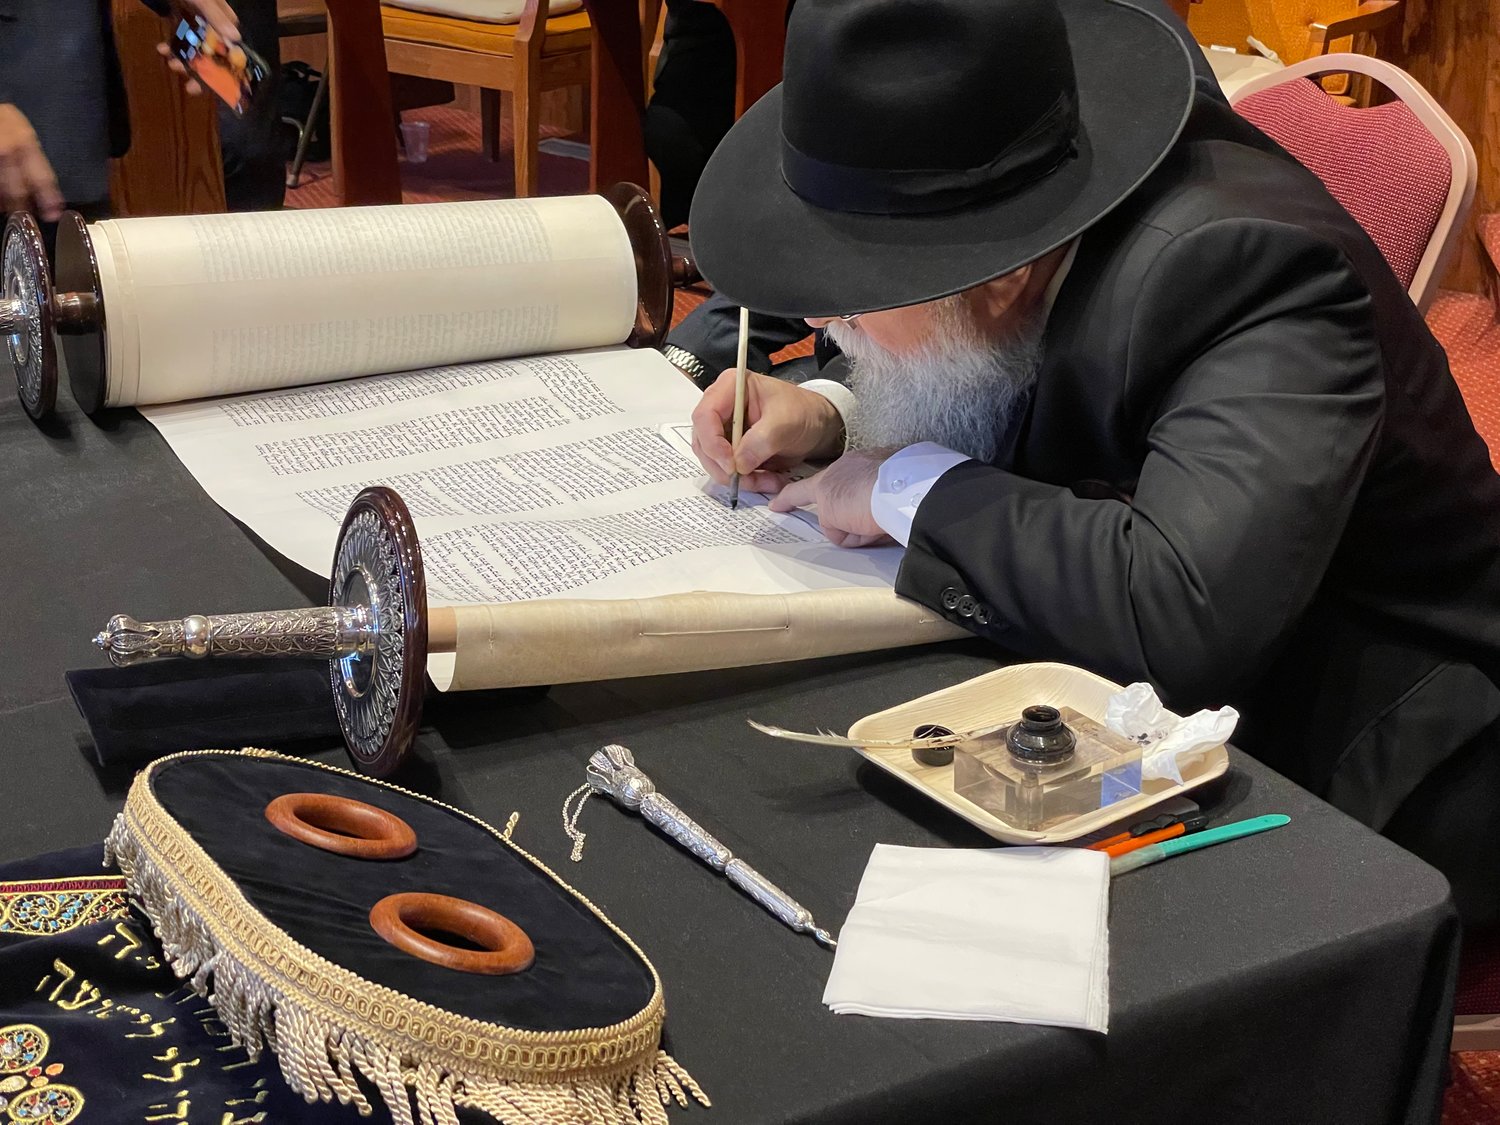 At Congregation Ohav Shalom on Sunday, Rabbi Pincus, a renowned sofer — a traditional Jewish scribe — completed the final 100 letters of a new Sefer Torah, in memory of Merrick resident Samuel Adwar.